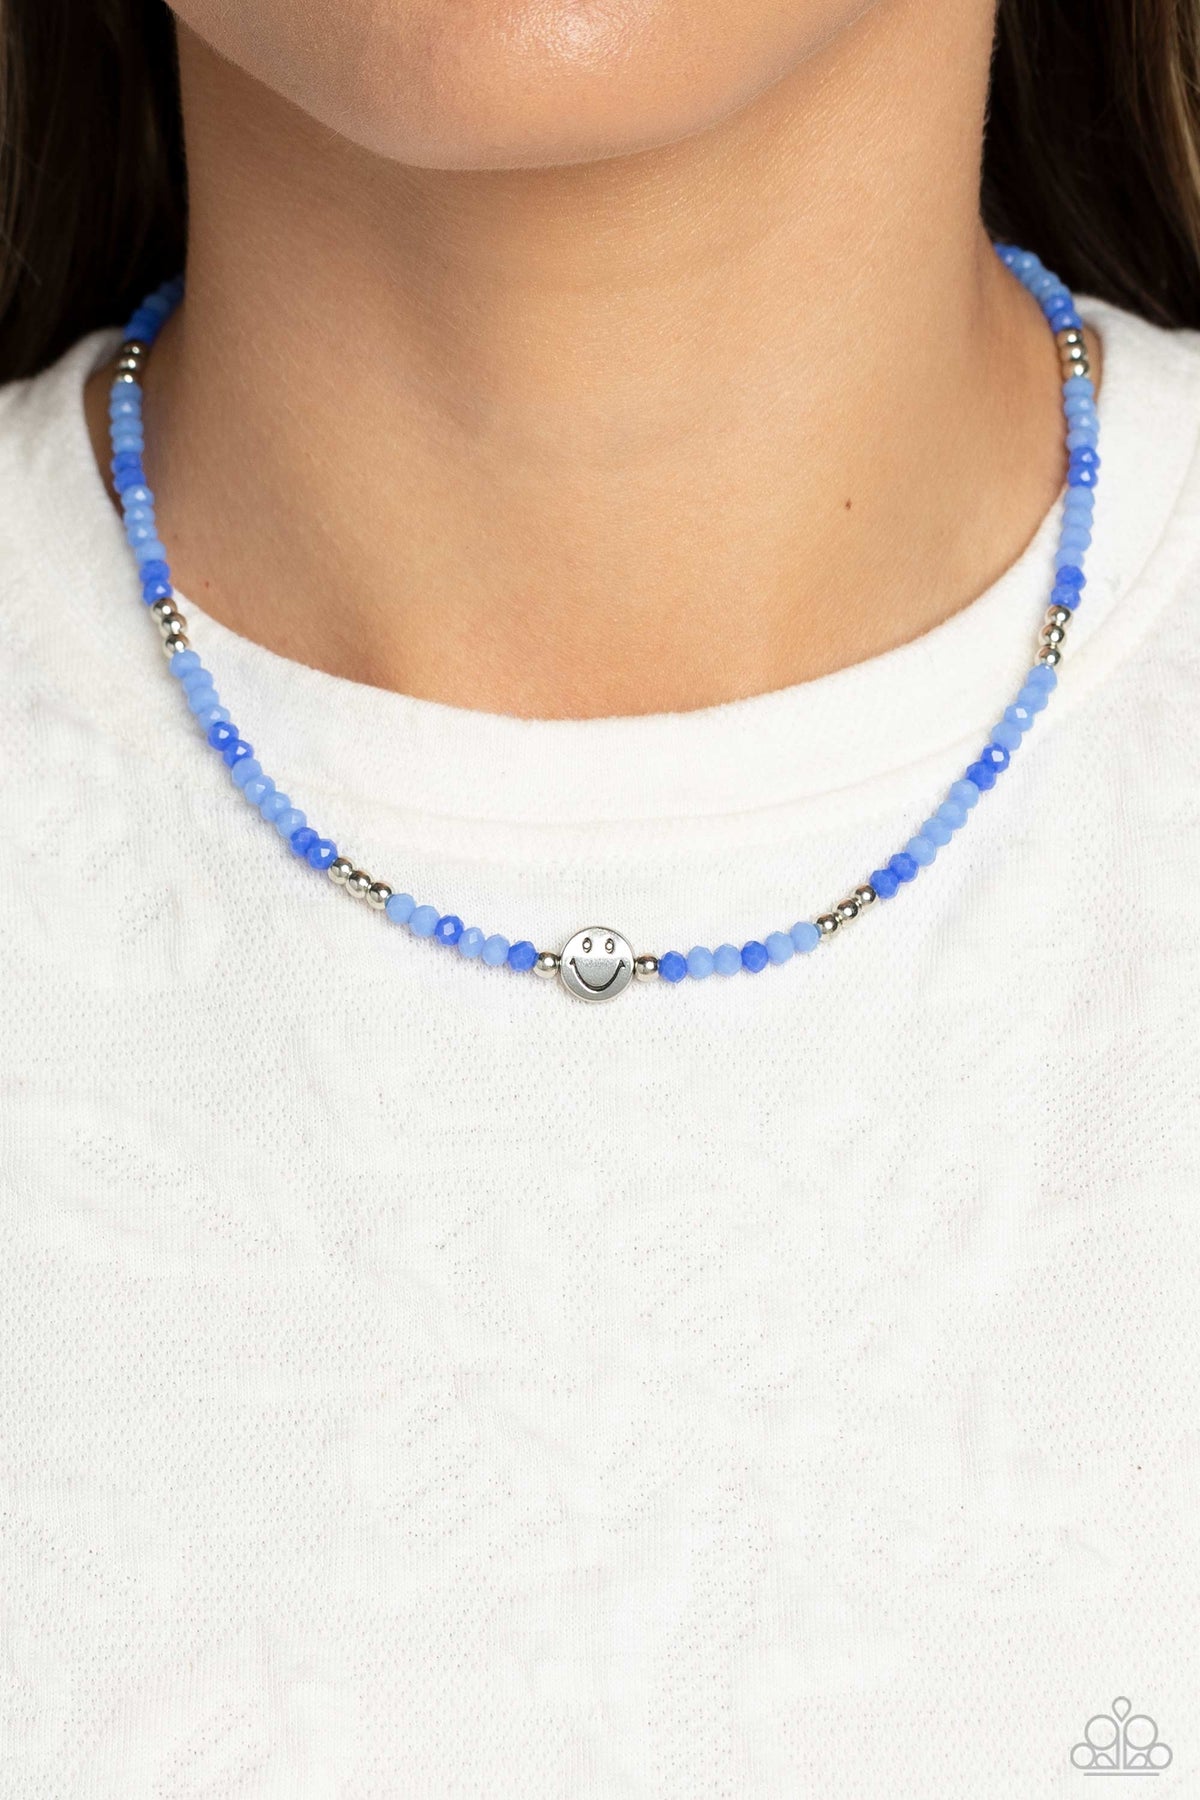 Beaming Bling Blue Necklace - Paparazzi Accessories-on model - CarasShop.com - $5 Jewelry by Cara Jewels